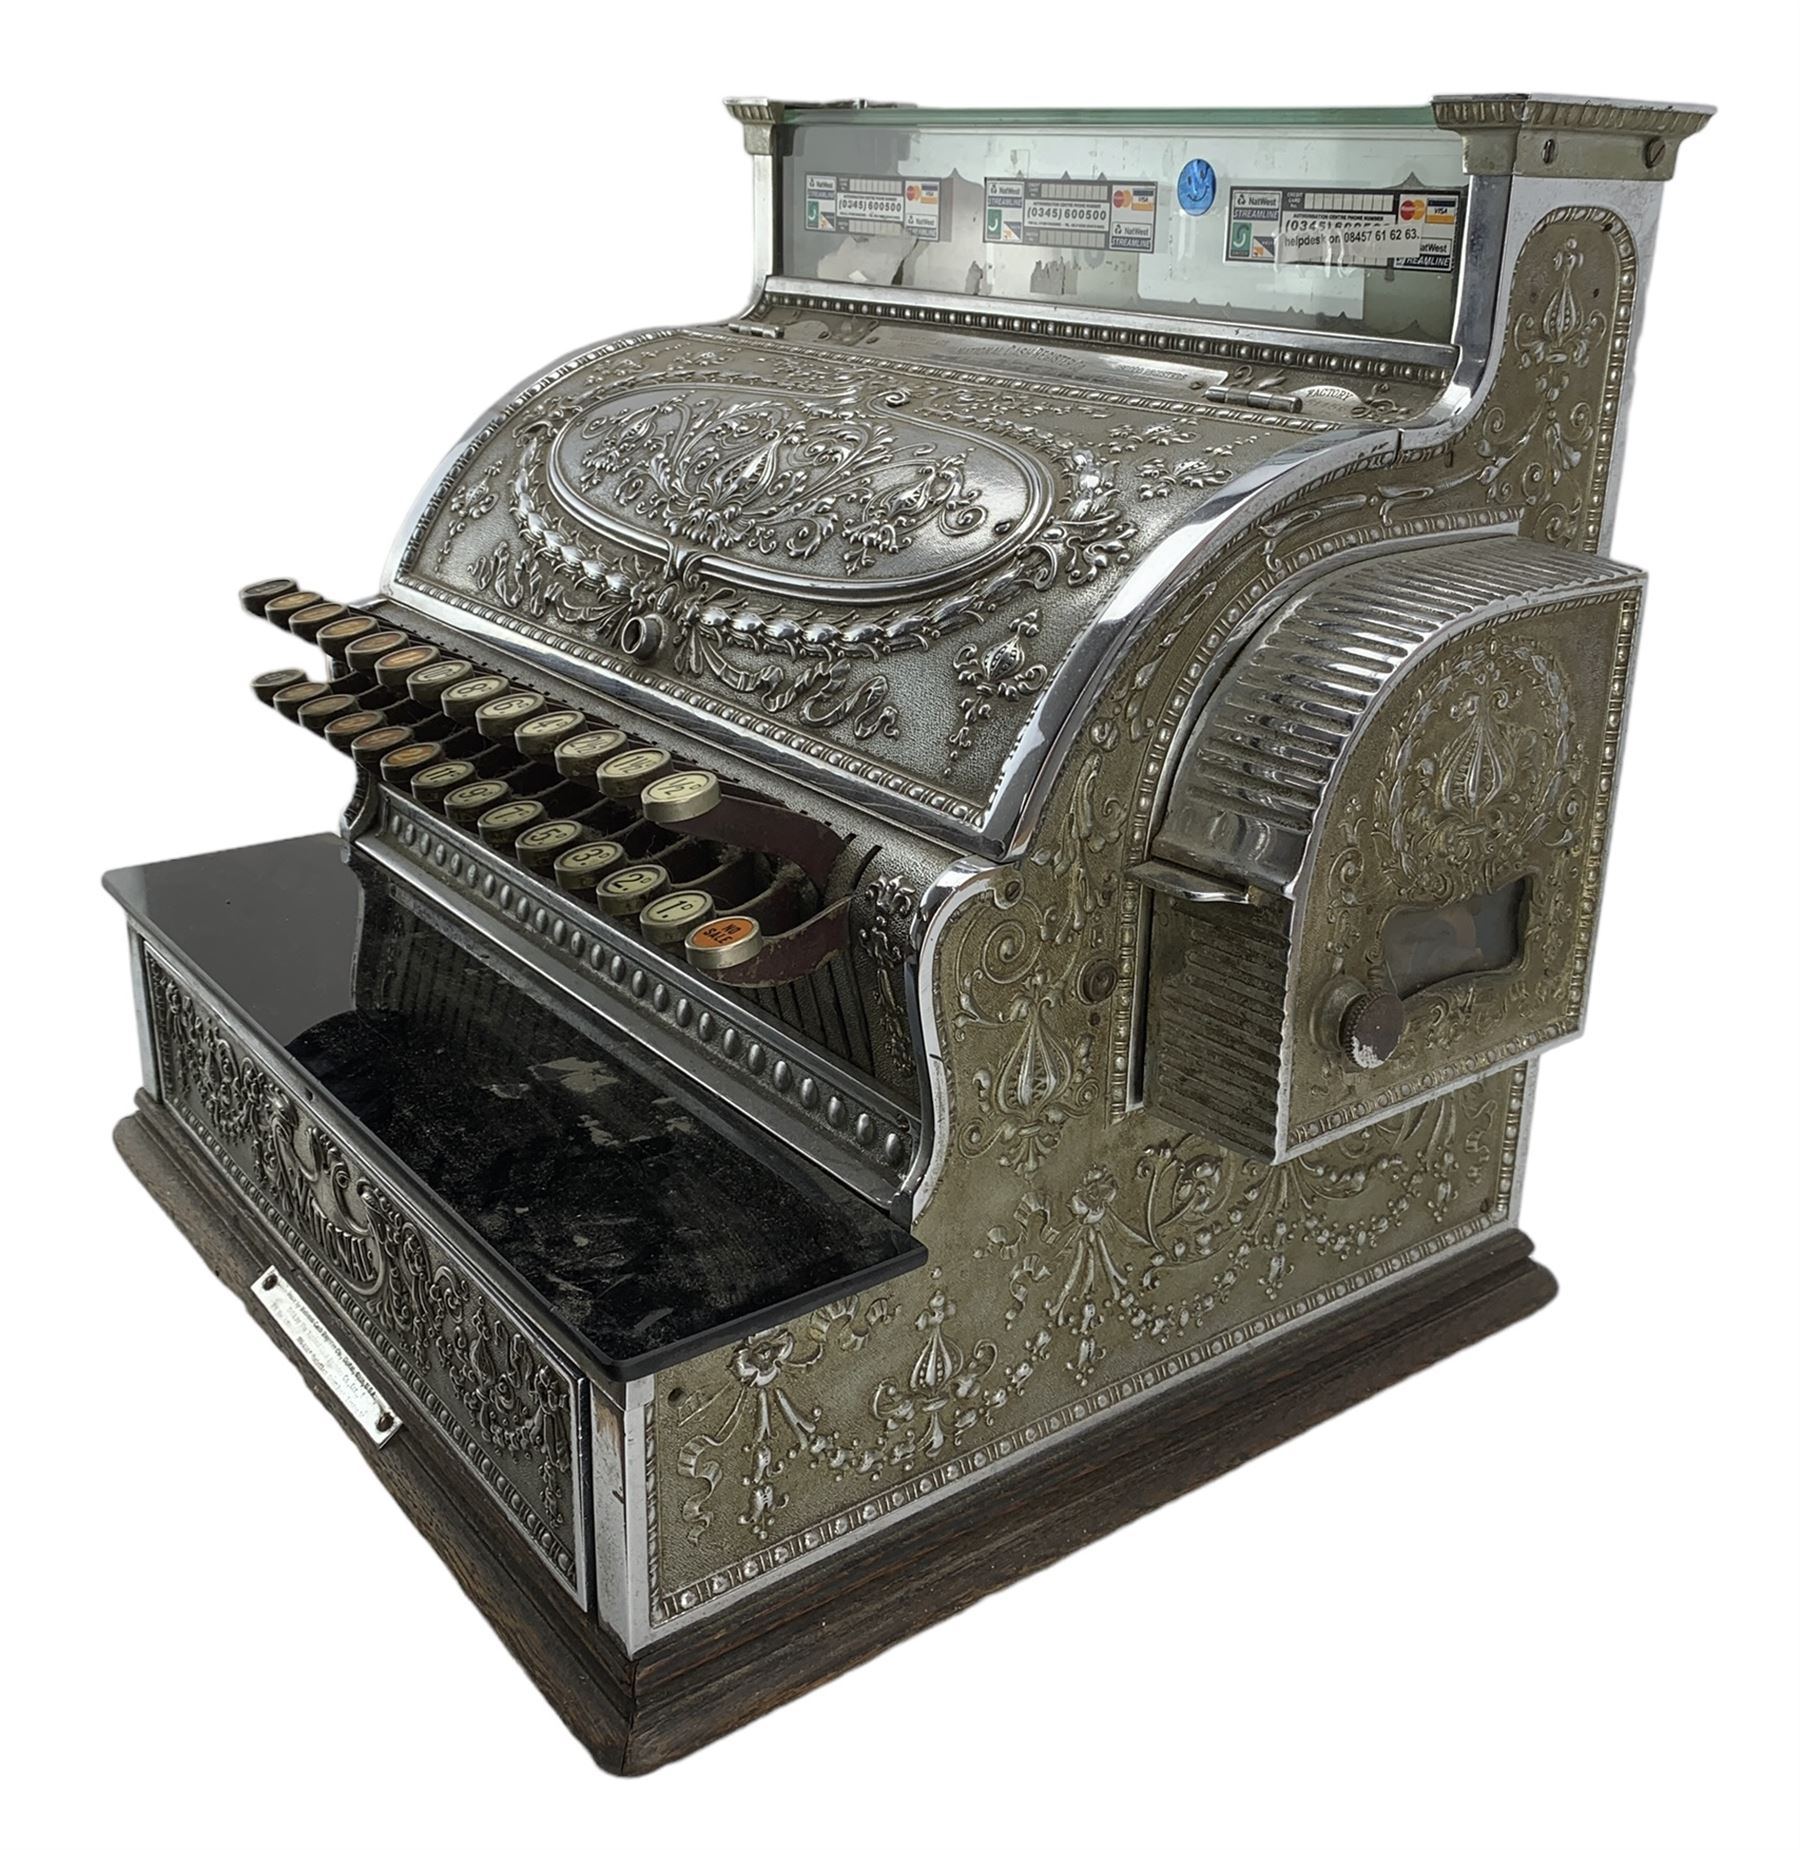 Early 20th century National Cash Register by the National Cash Register Co. - Image 2 of 5